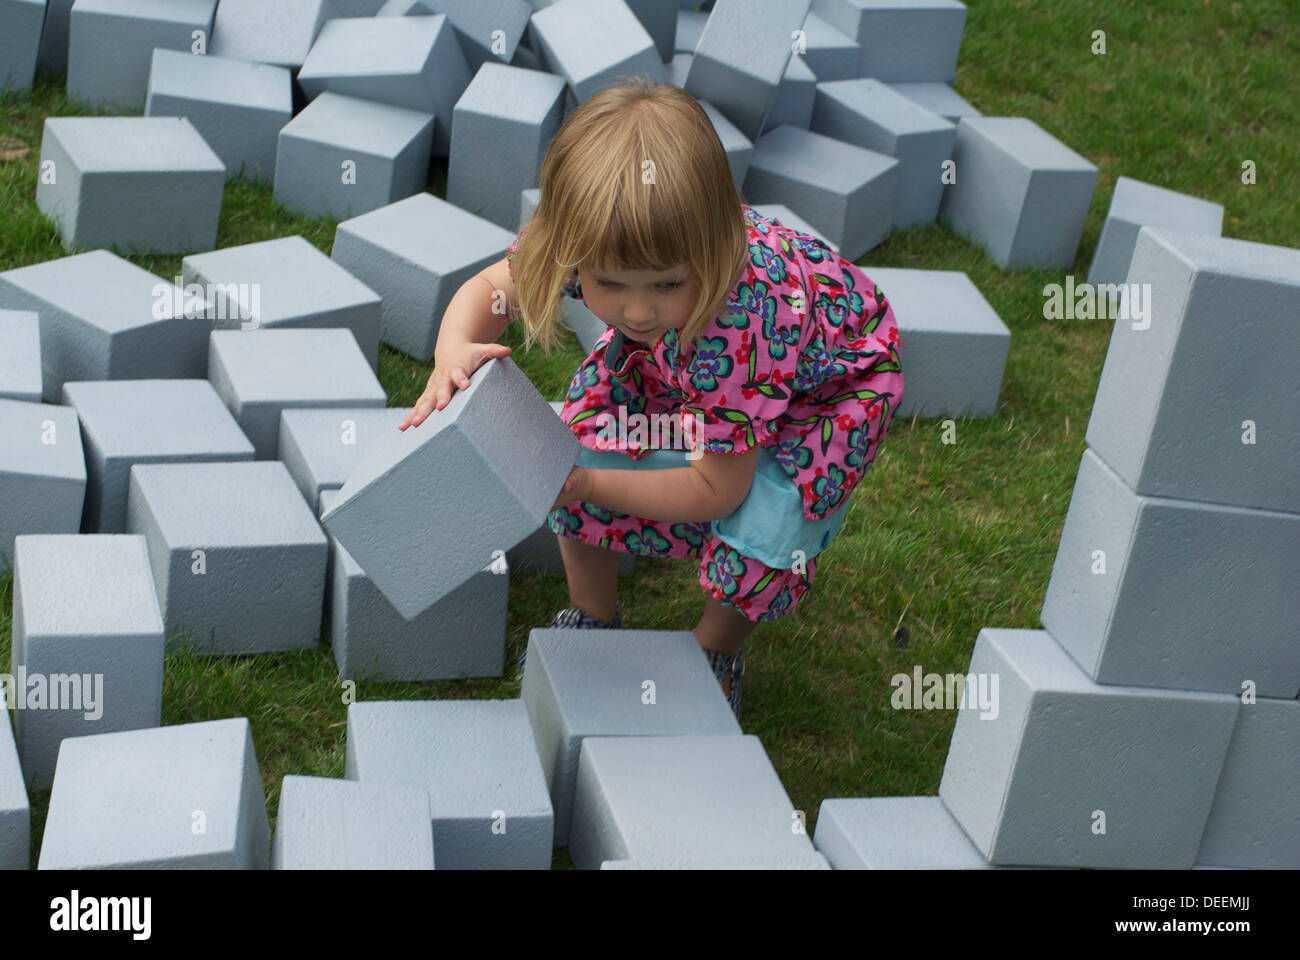 young girl playing outside with building blocks Stock Photo